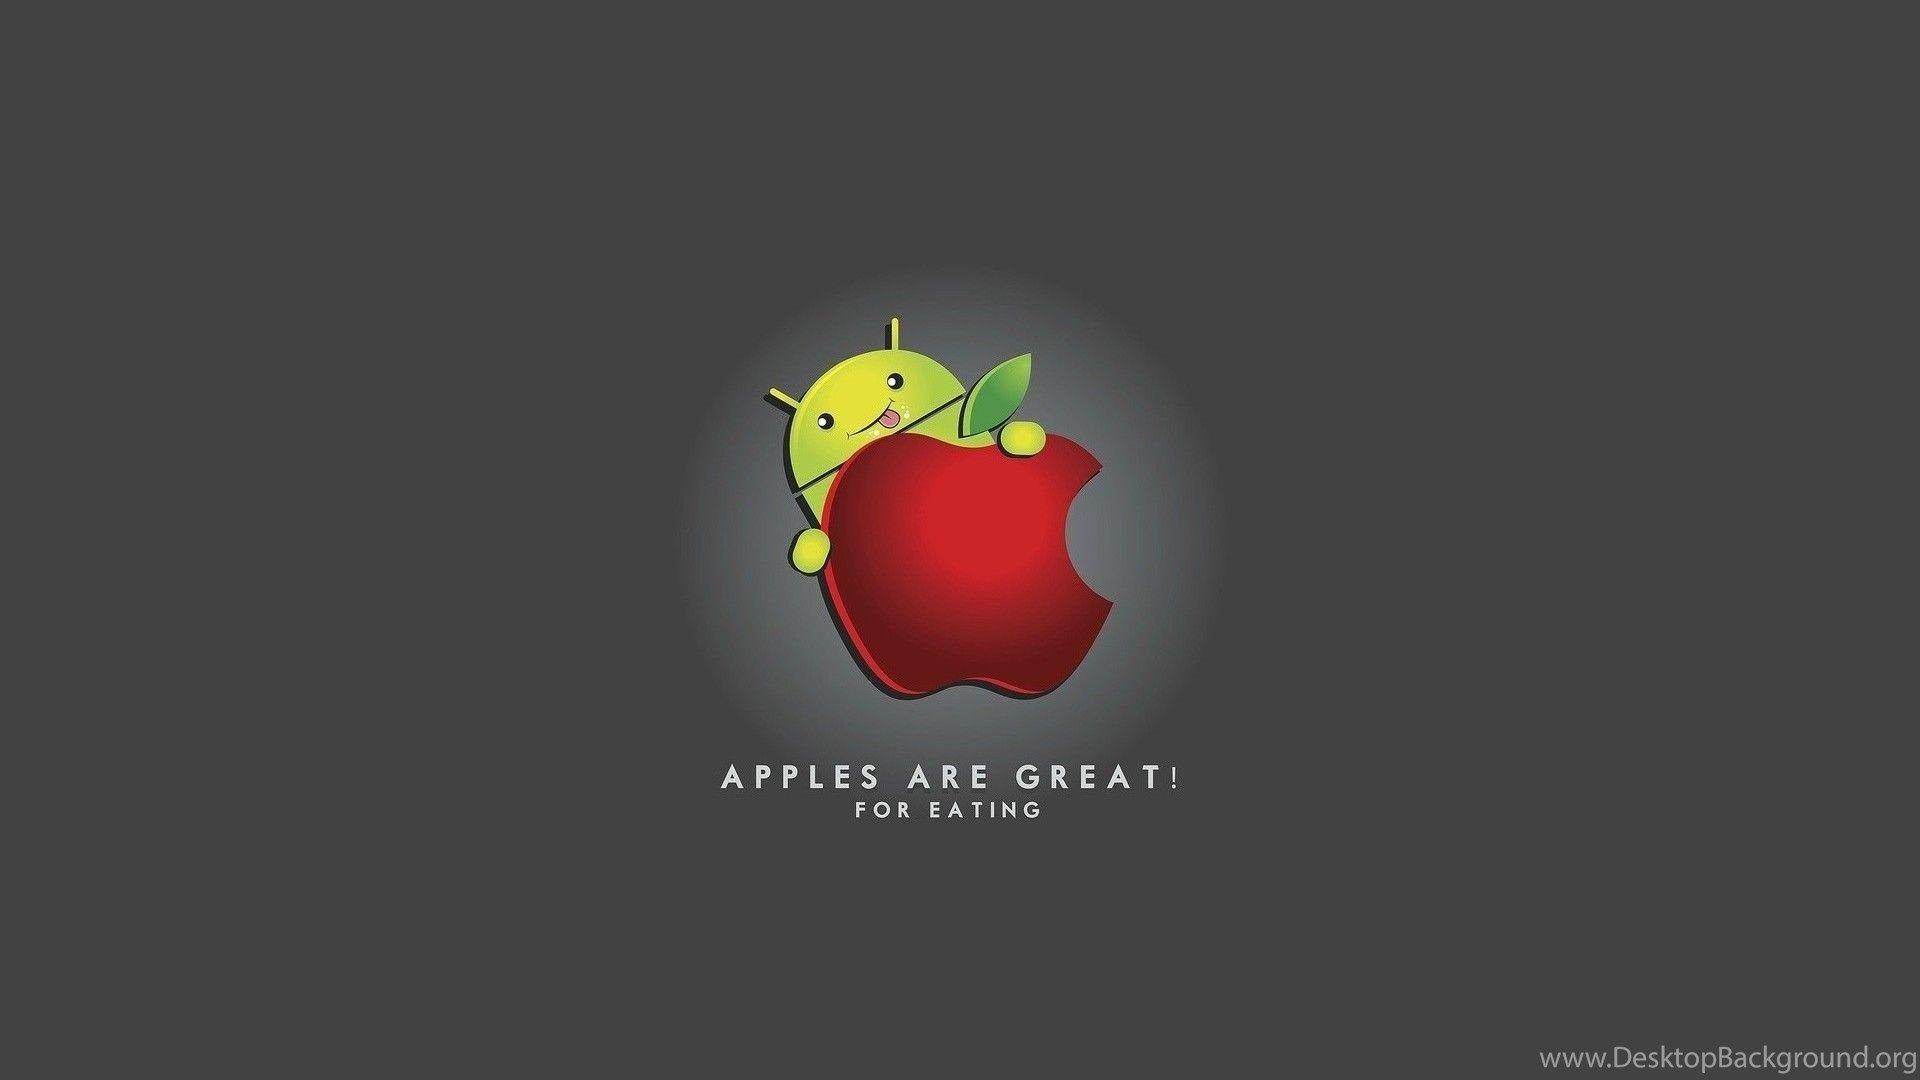 Funny Apple Logo - Apple: Android Apple Logo Funny Free Wallpaper For HD 16:9 High